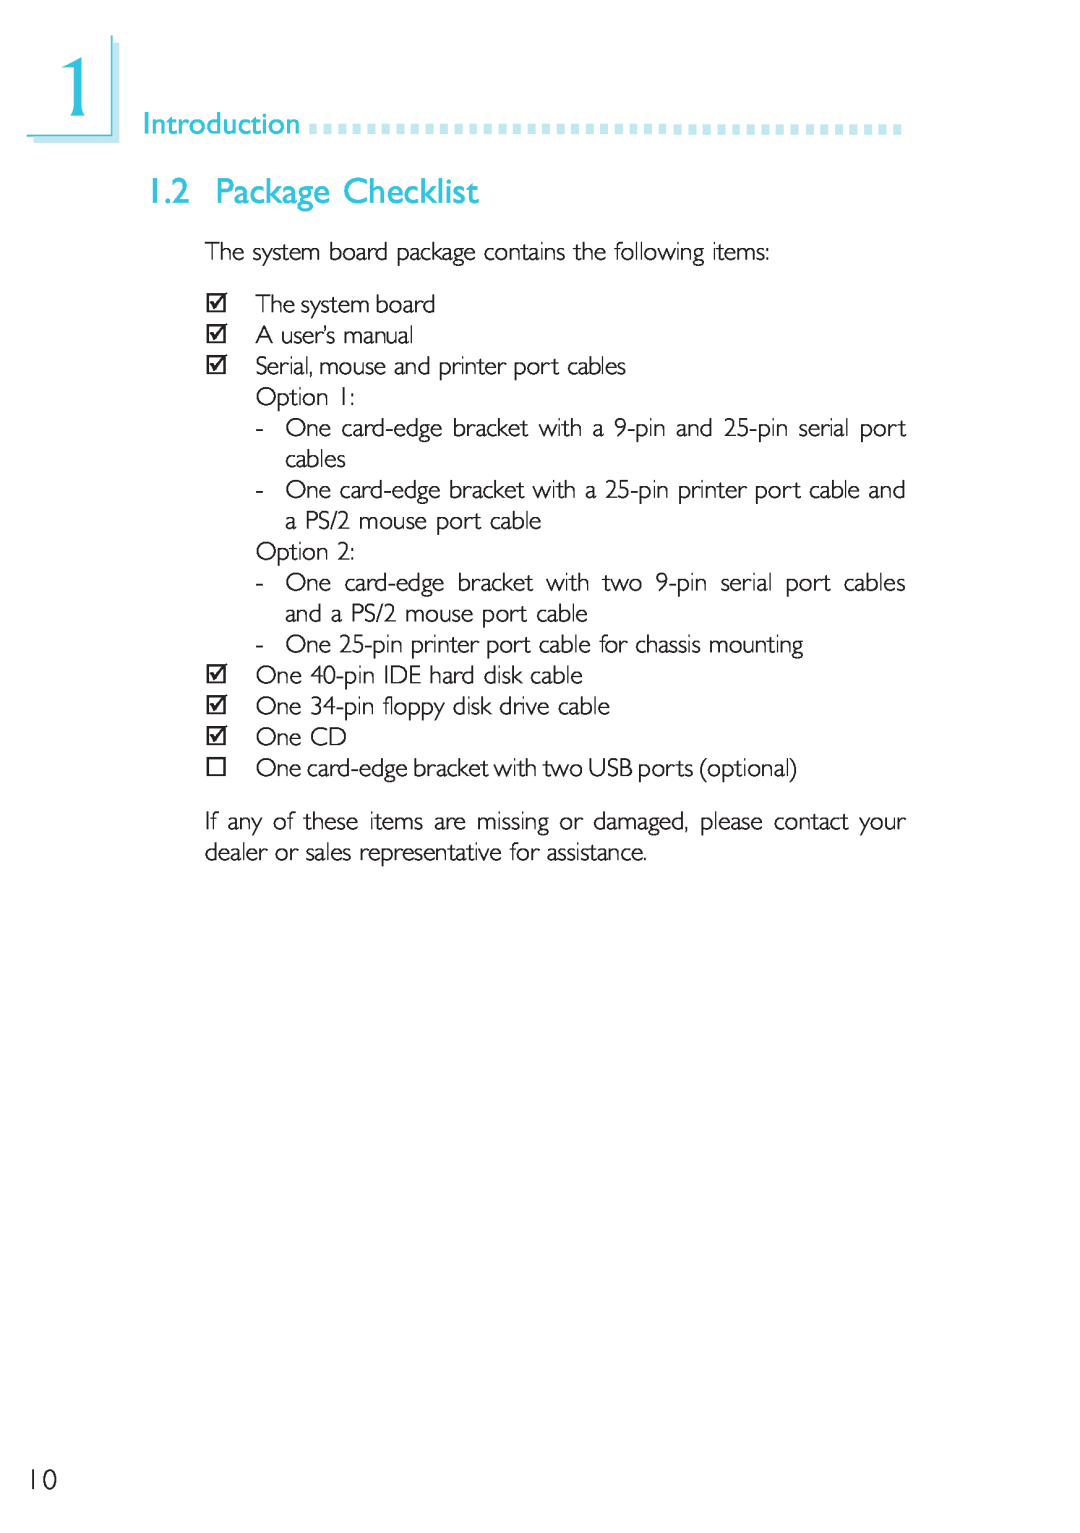 Microsoft G7VP2 manual Package Checklist, Introduction 